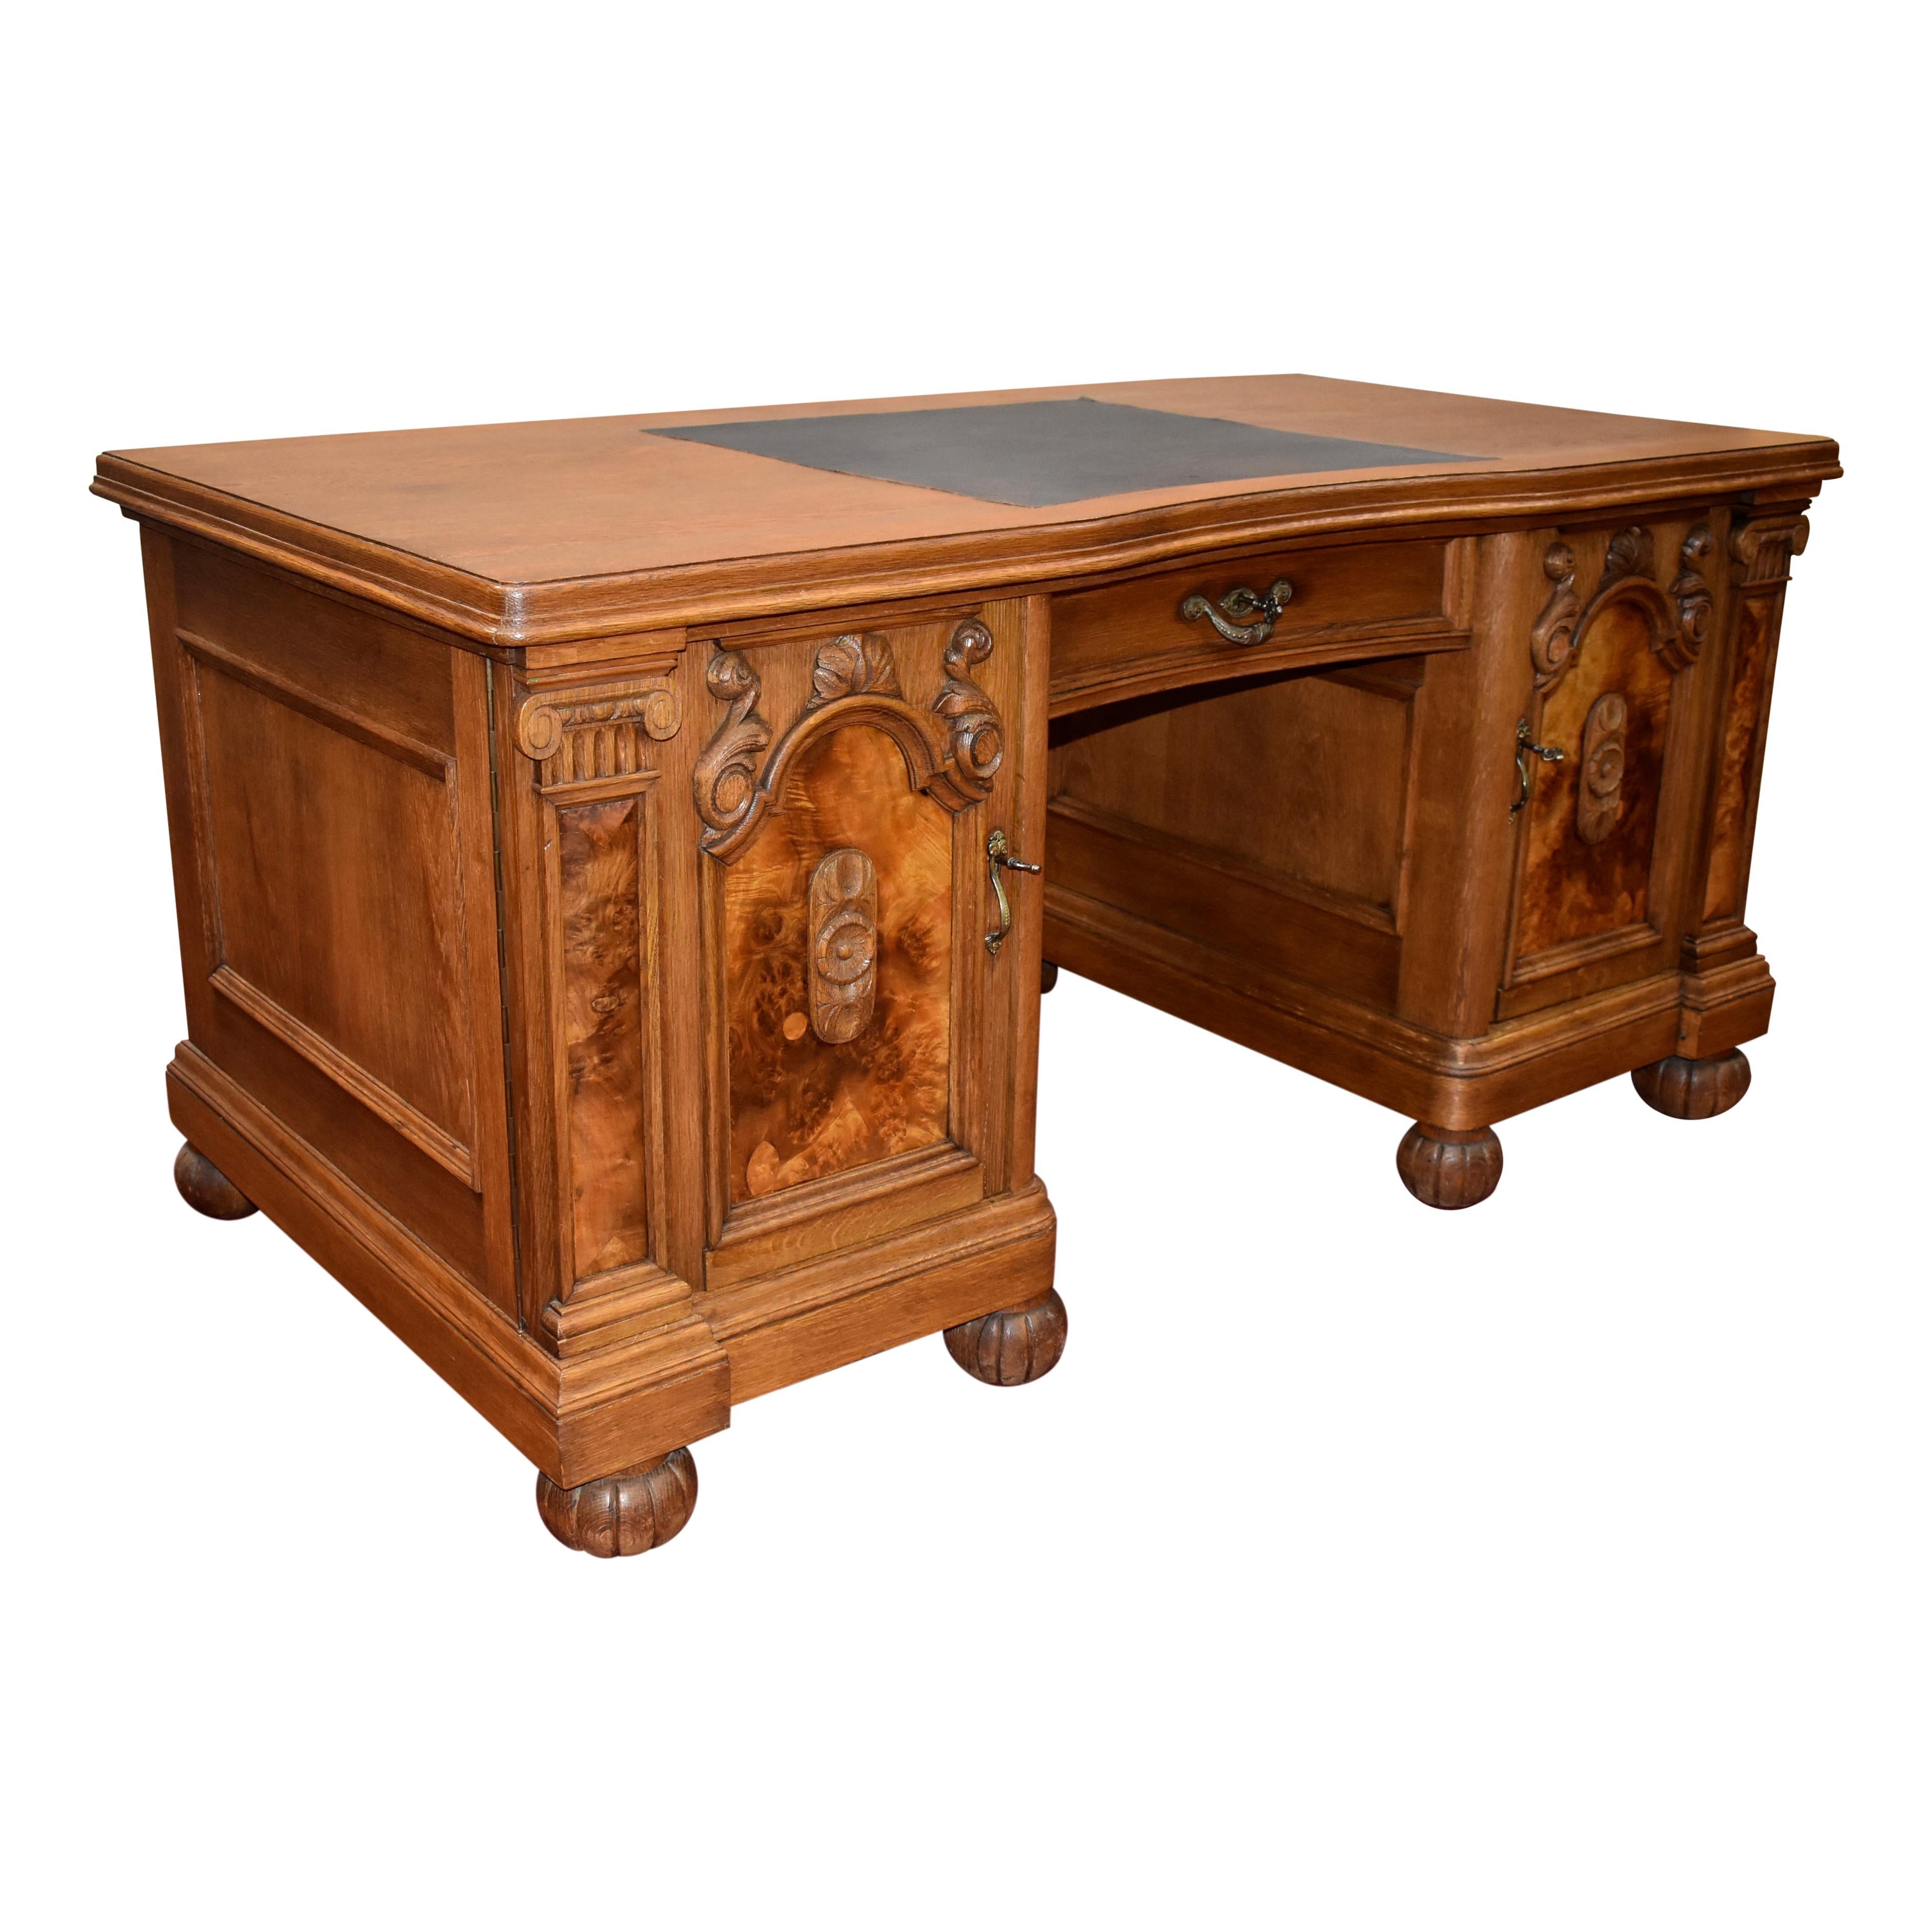 Beautiful from every angle, this German desk showcases a rectangular top over a single drawer flanked by two pedestals. The top features a beveled edge and leather writing surface at the center. The pedestals feature arched doors with recessed